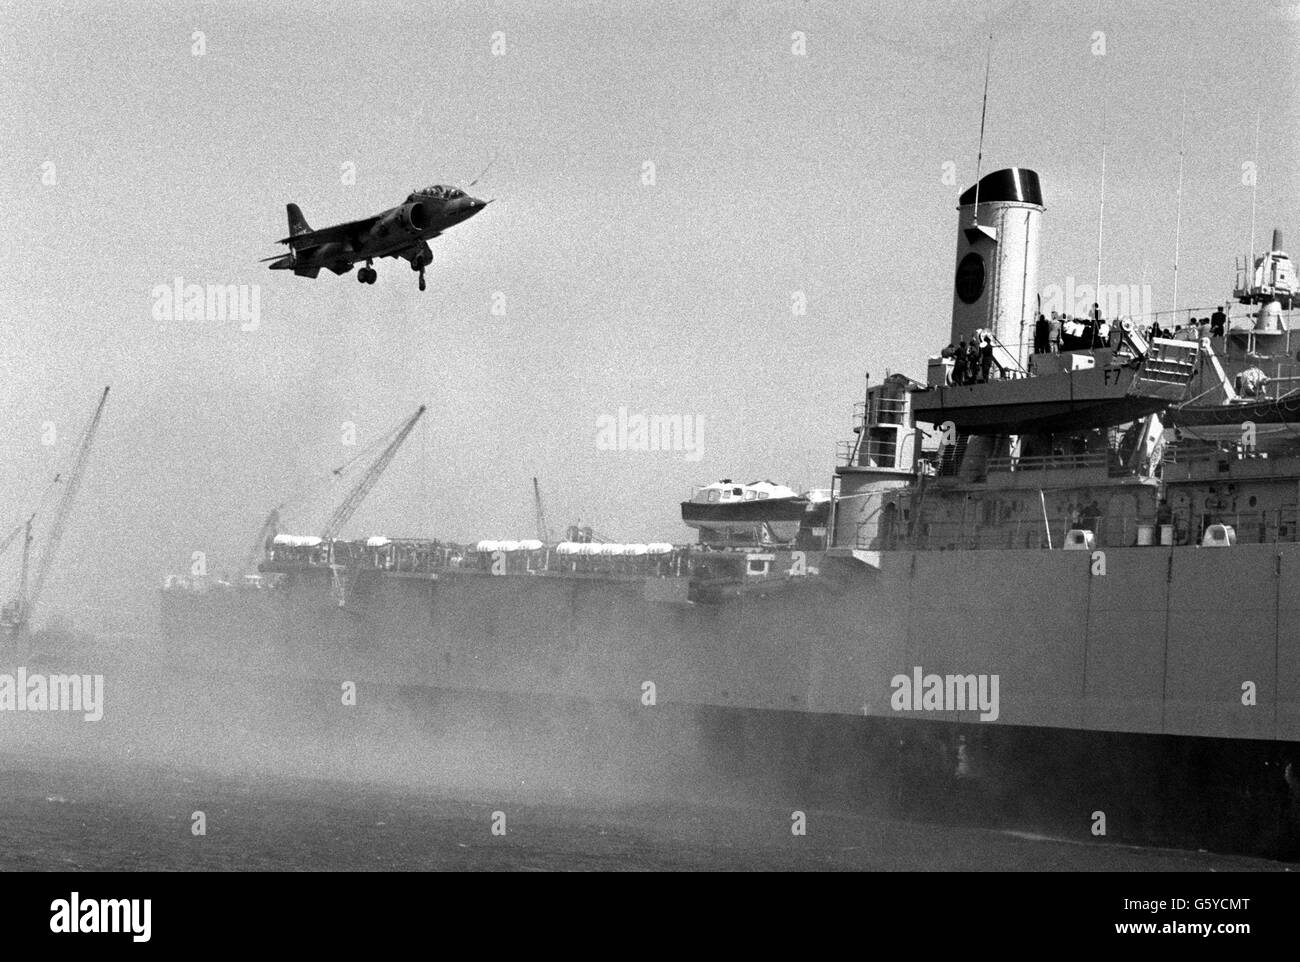 A Harrier's downward thrust raises a filmy curtain of spray as the Hawker Siddeley jump jet comes in to land on the 12,000 ton assault ship HMS Fearless, berthing at Greenwich. The ship is on a visit, and the Harrier will be in an equipment exhibition seen by delegates to the Atlantic Treaty Association Seminar taking place at the Royal Navy Staff College at Greenwich. Stock Photo